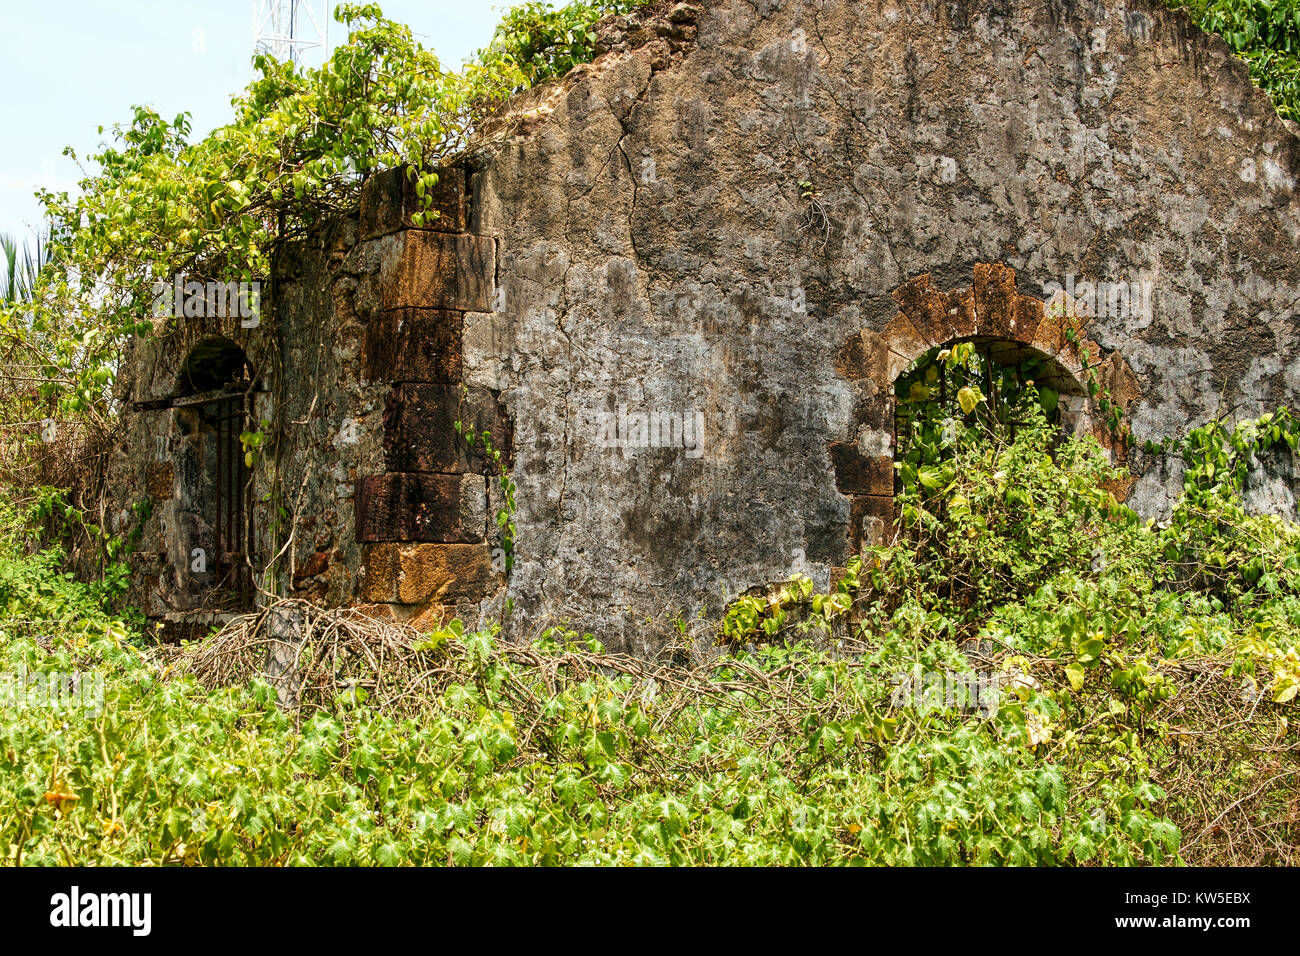 Ruins of one of the old French Prison buildings. French Guiana, Devil's Island. Bars can still be seen on the side window. Isla Royale. Stock Photo